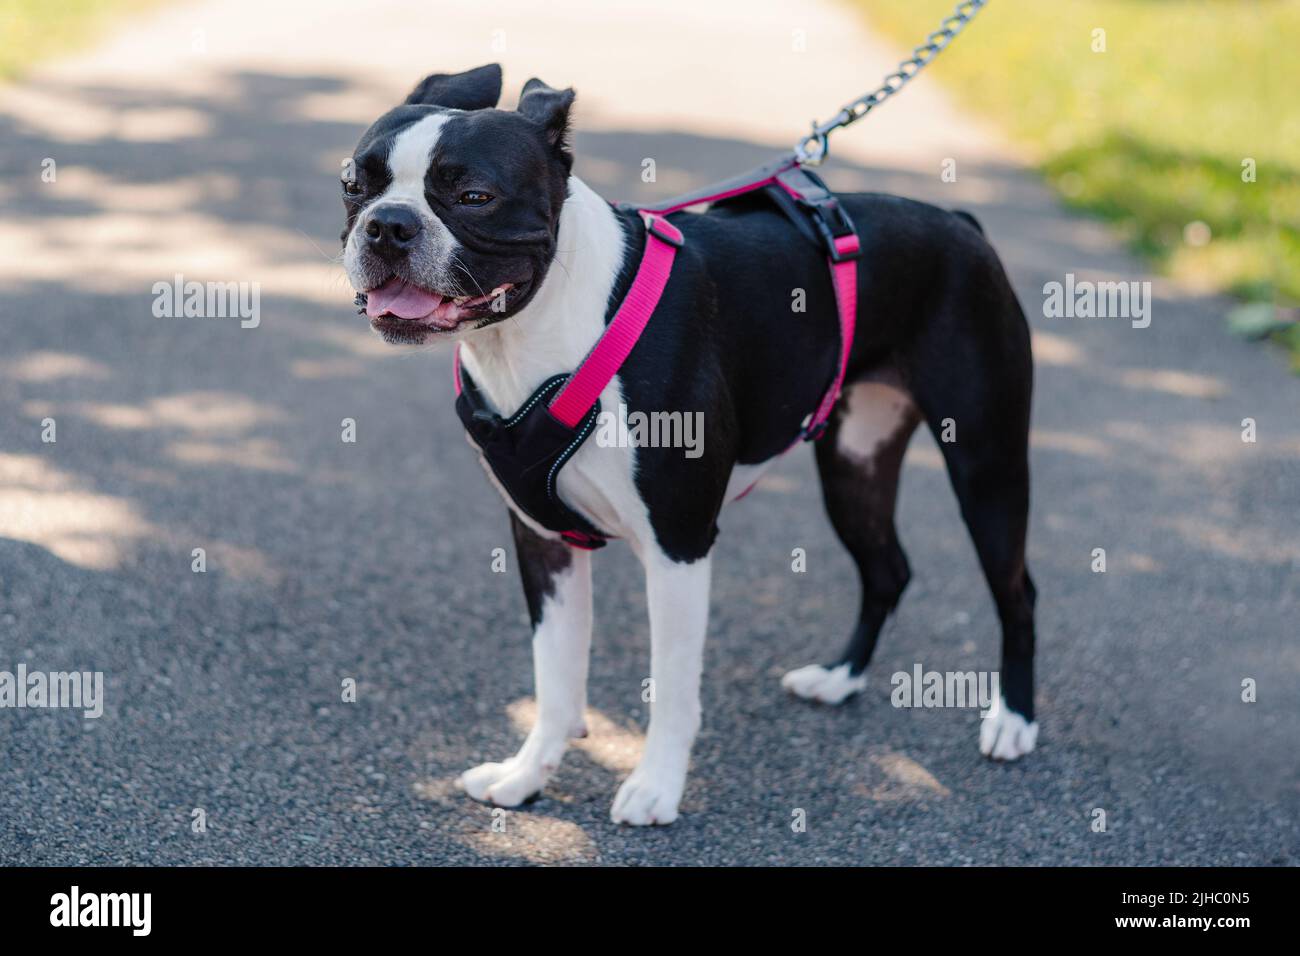 Young Boston Terrier standing outside, wearing a harness with pink straps and a rope chain leash. Her ears are back against her head. Stock Photo